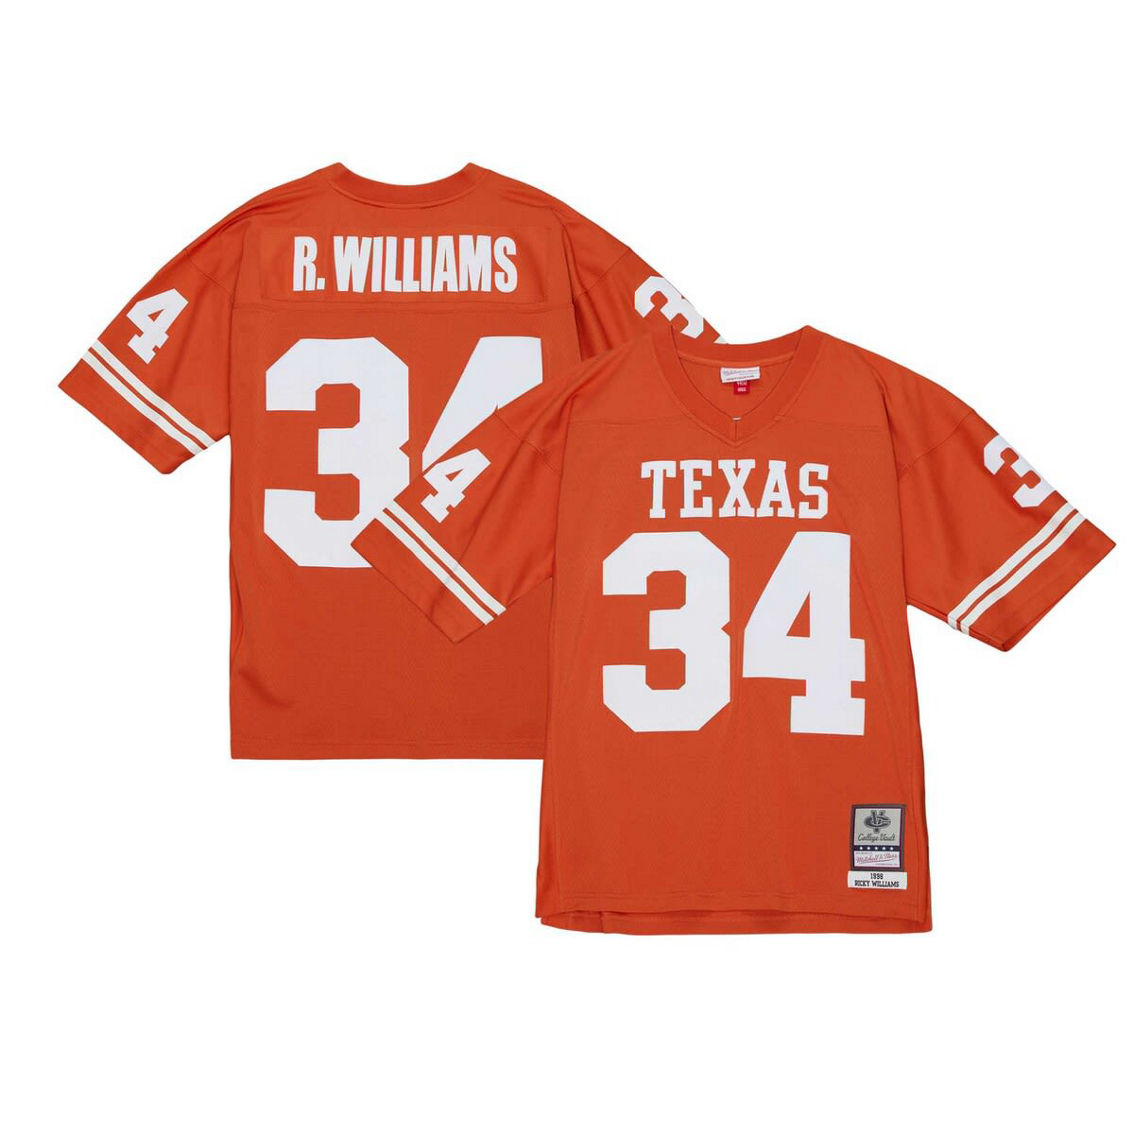 Mitchell & Ness Men's Ricky Williams Texas Orange Texas Longhorns Throwback Jersey - Image 2 of 4